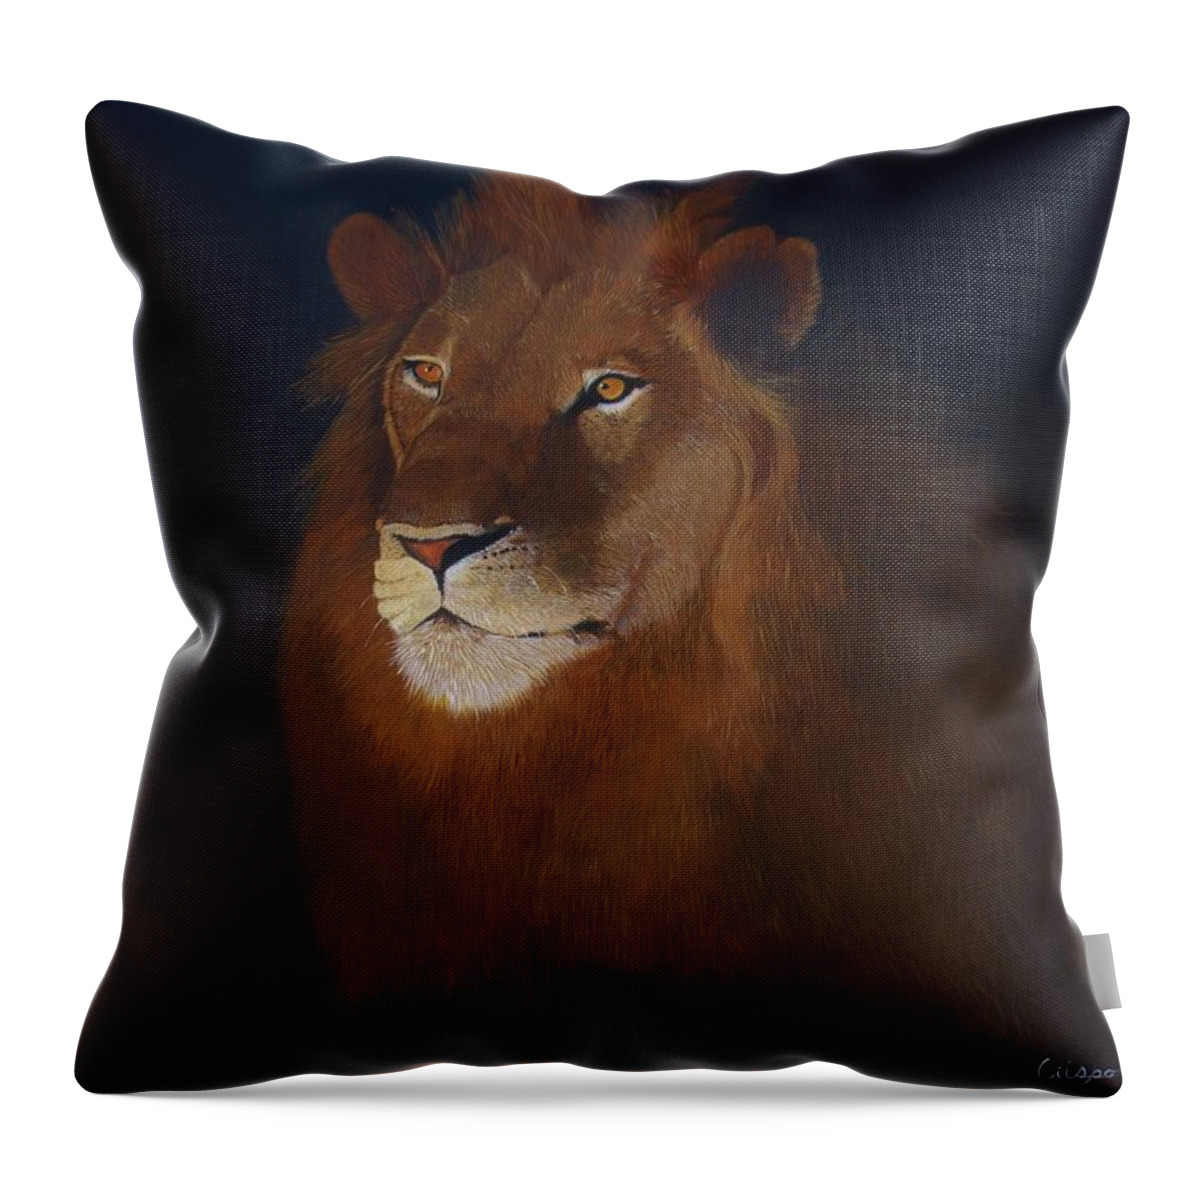 Lion Throw Pillow featuring the painting Royalty by Jean Yves Crispo